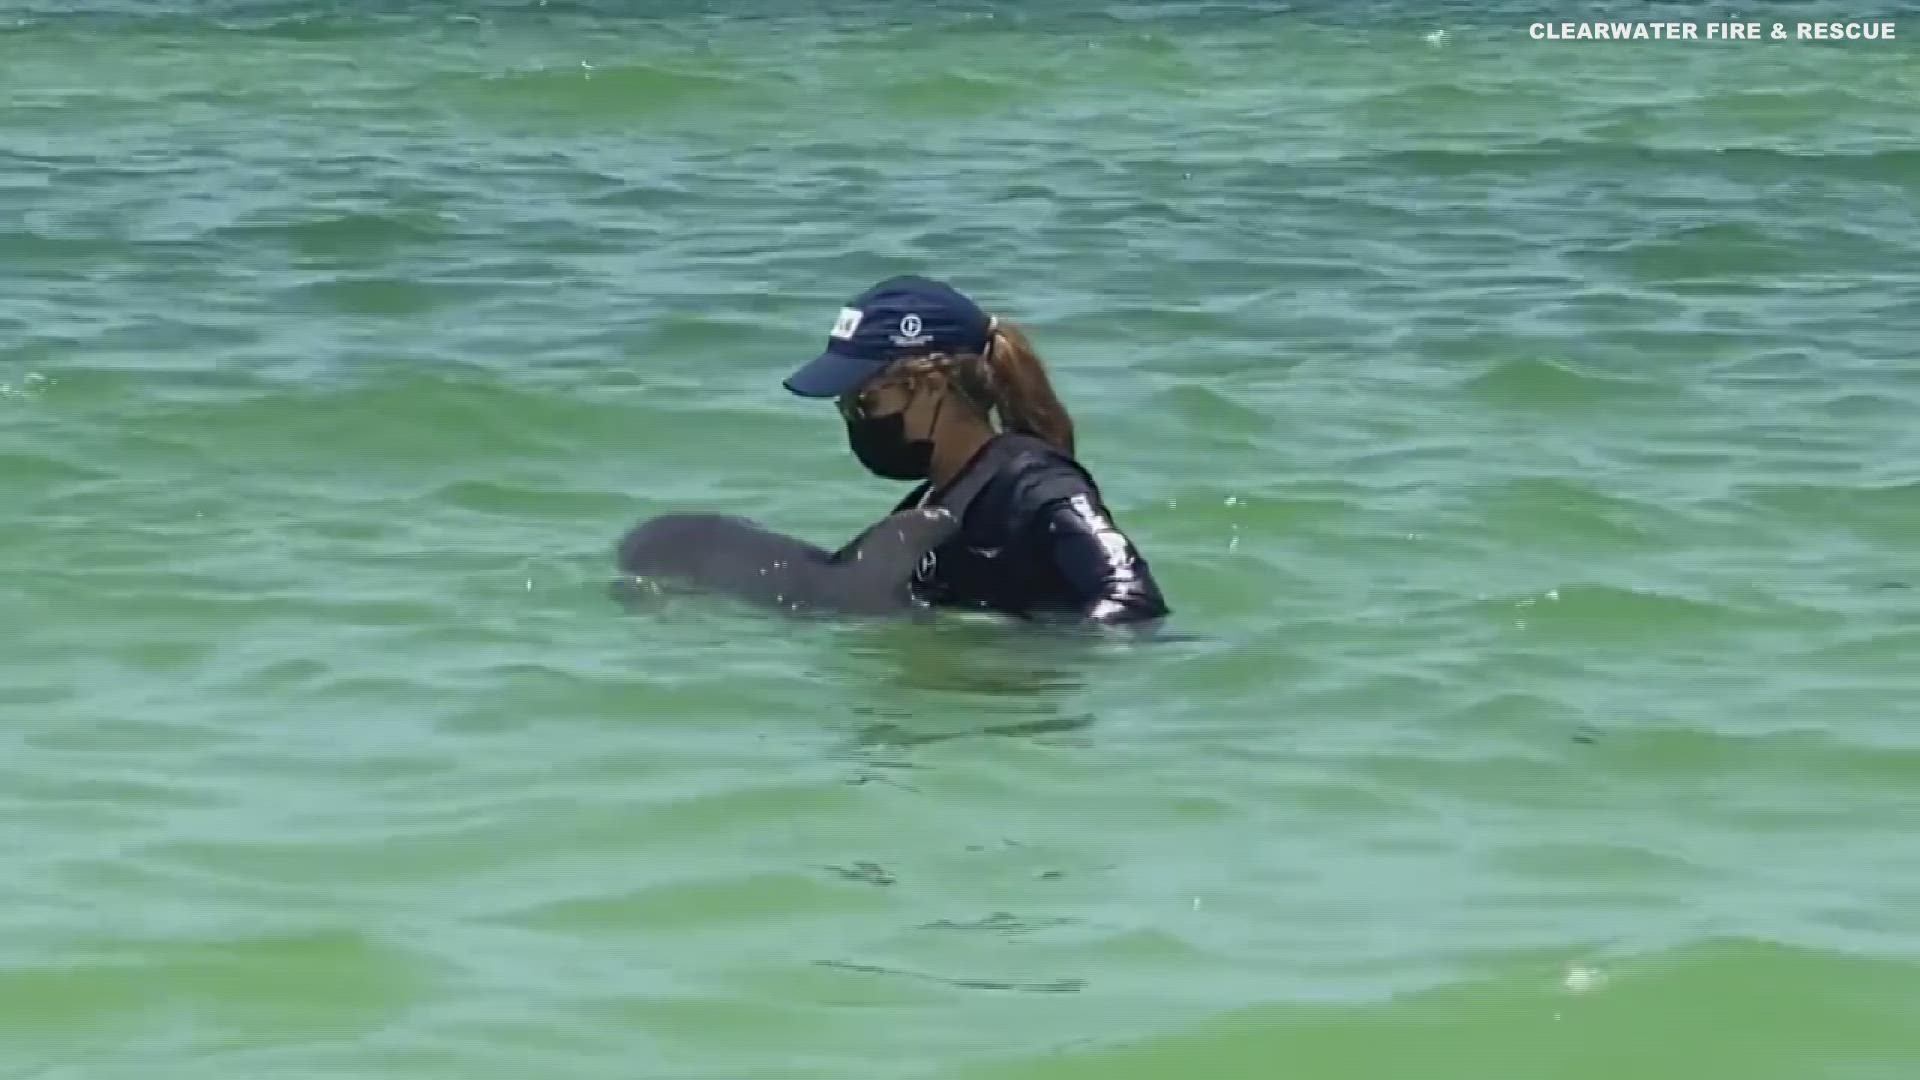 Clearwater Marine Aquarium is working to help the calf.